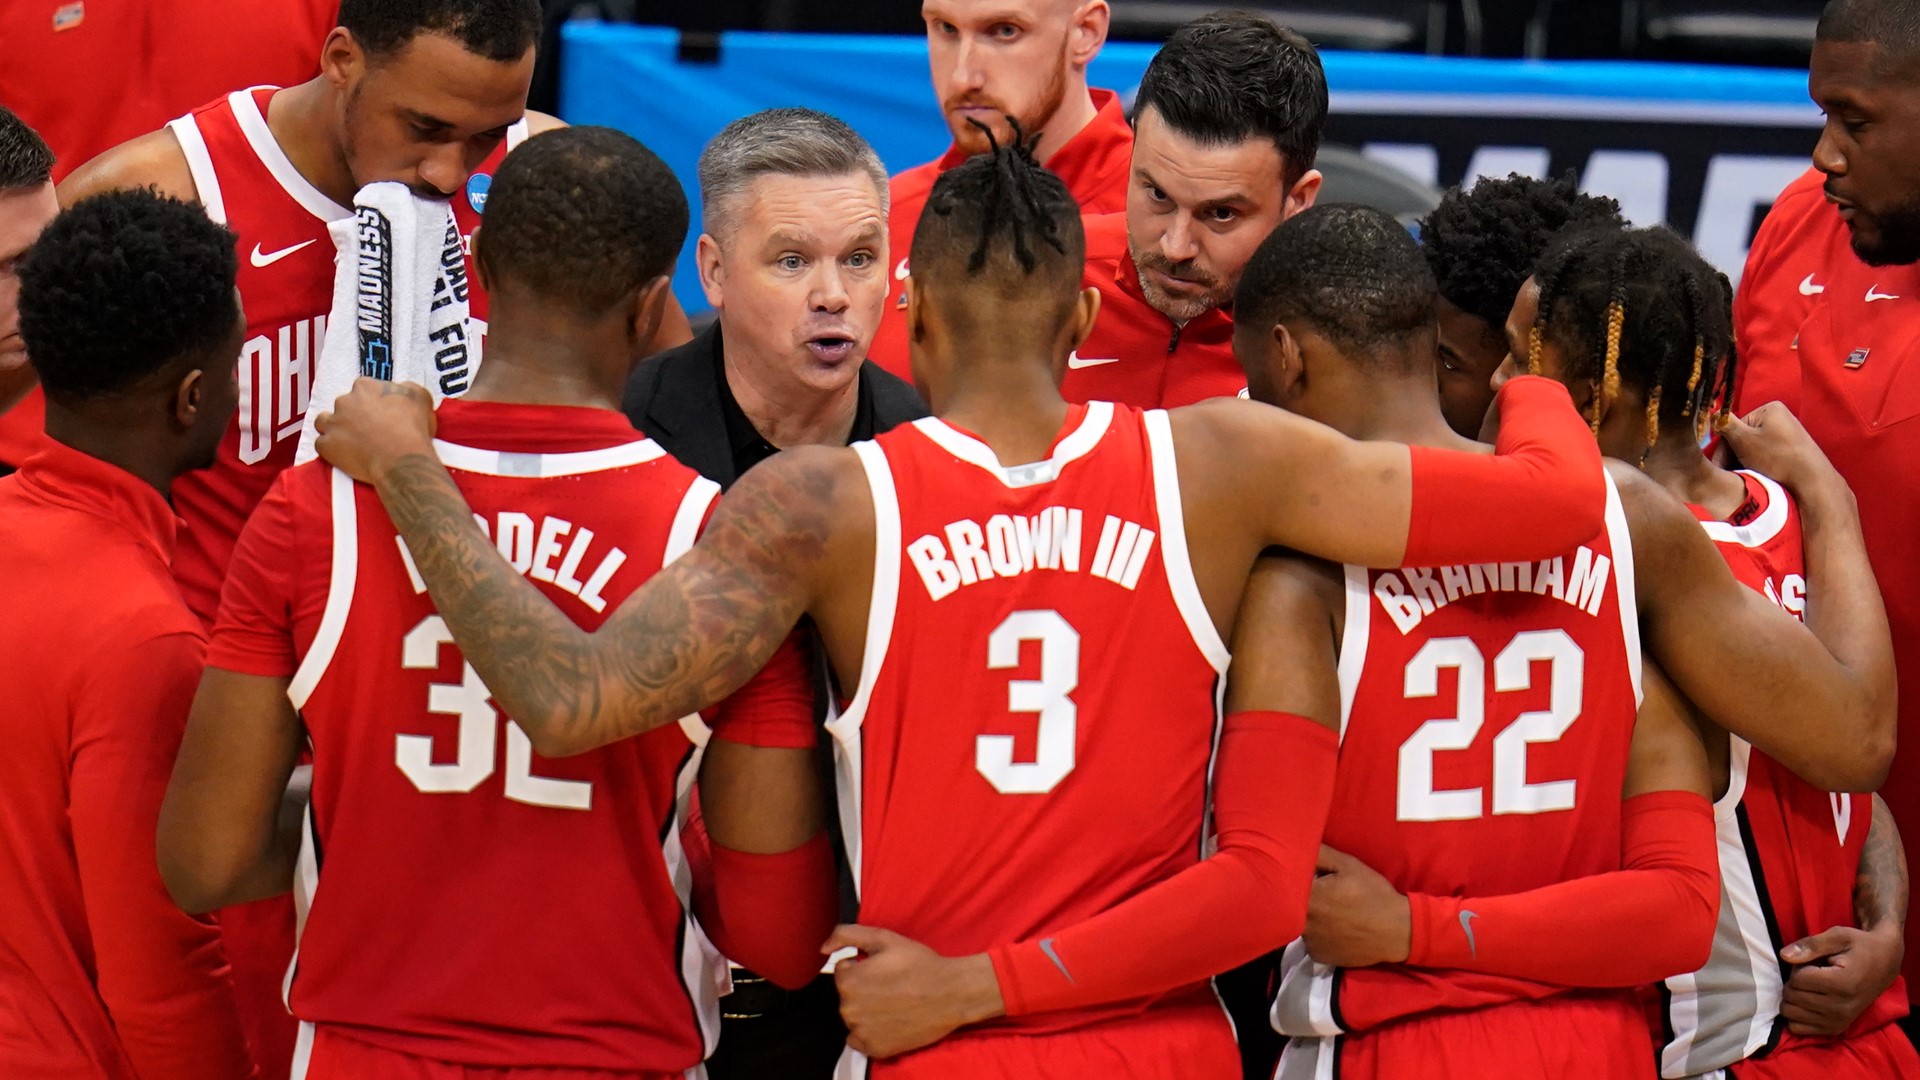 Dom Tiberi, Dave Holmes and Adam King are joined by 97.1 The Fan's Timmy Hall and former Buckeye Joey Lane to break down the team's 2nd-round loss in the tournament.